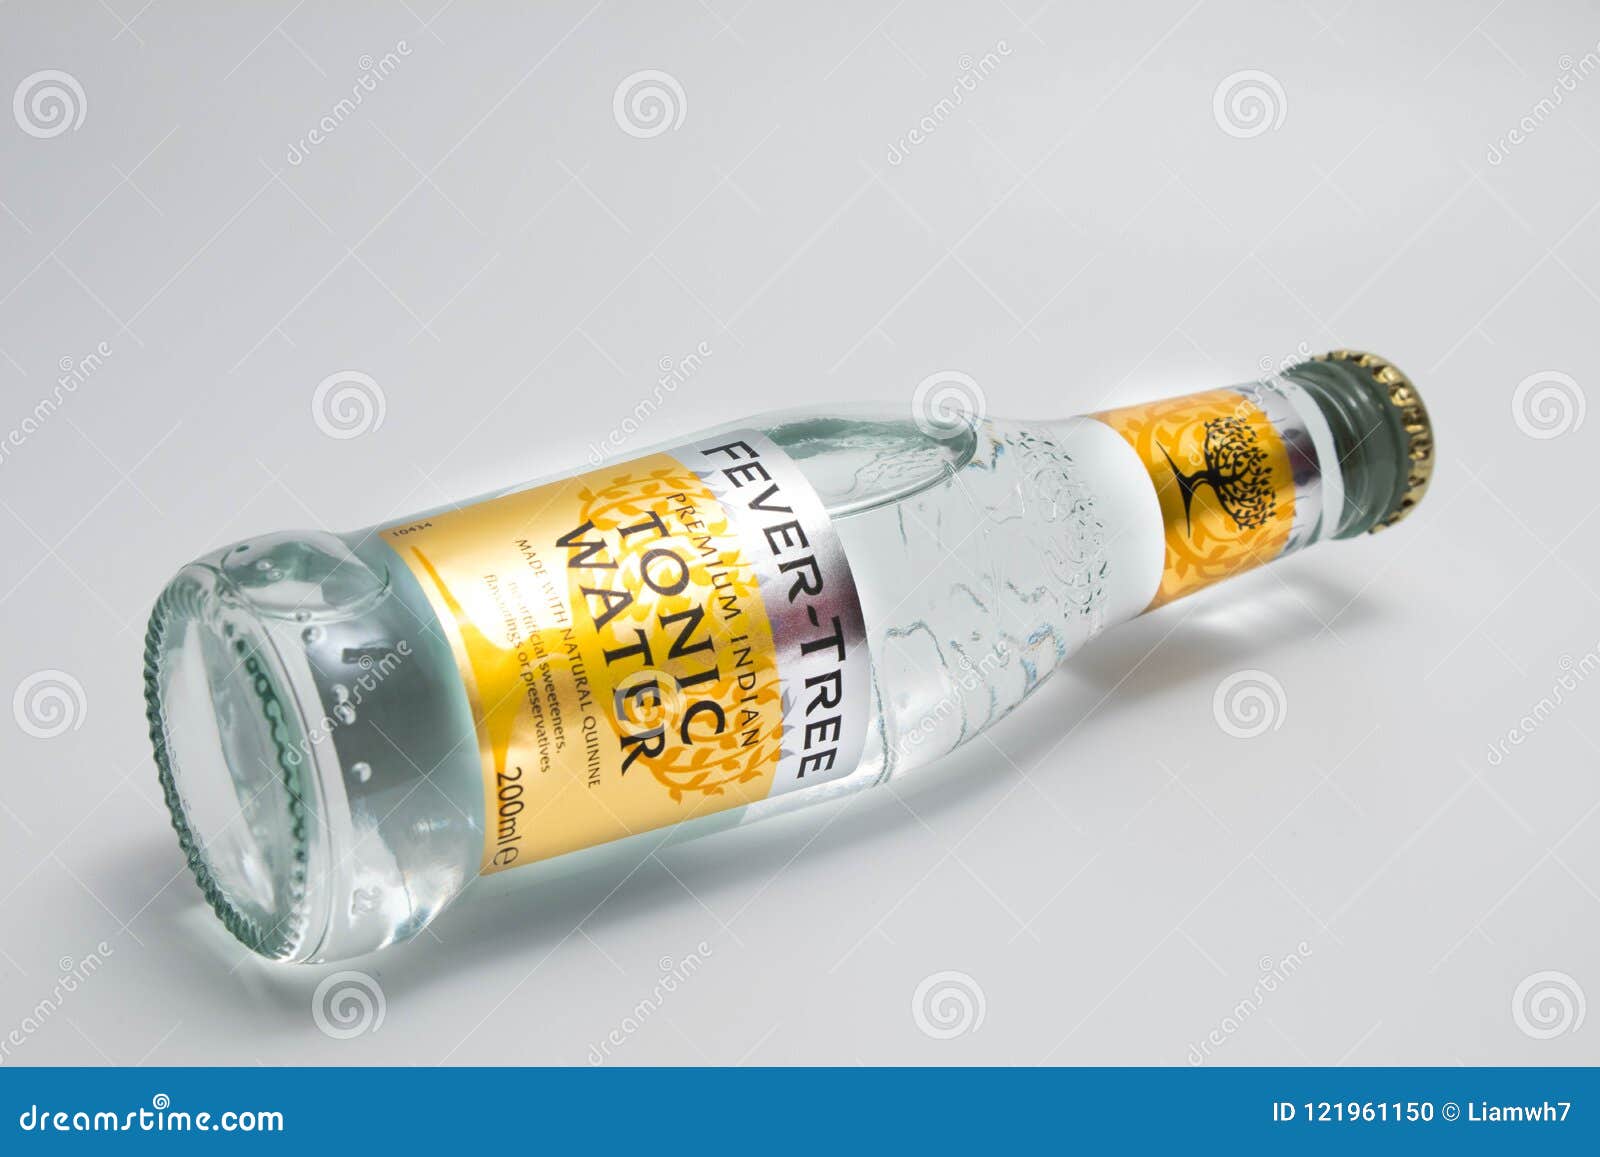 Download 8 575 Tonic Bottle Photos Free Royalty Free Stock Photos From Dreamstime Yellowimages Mockups